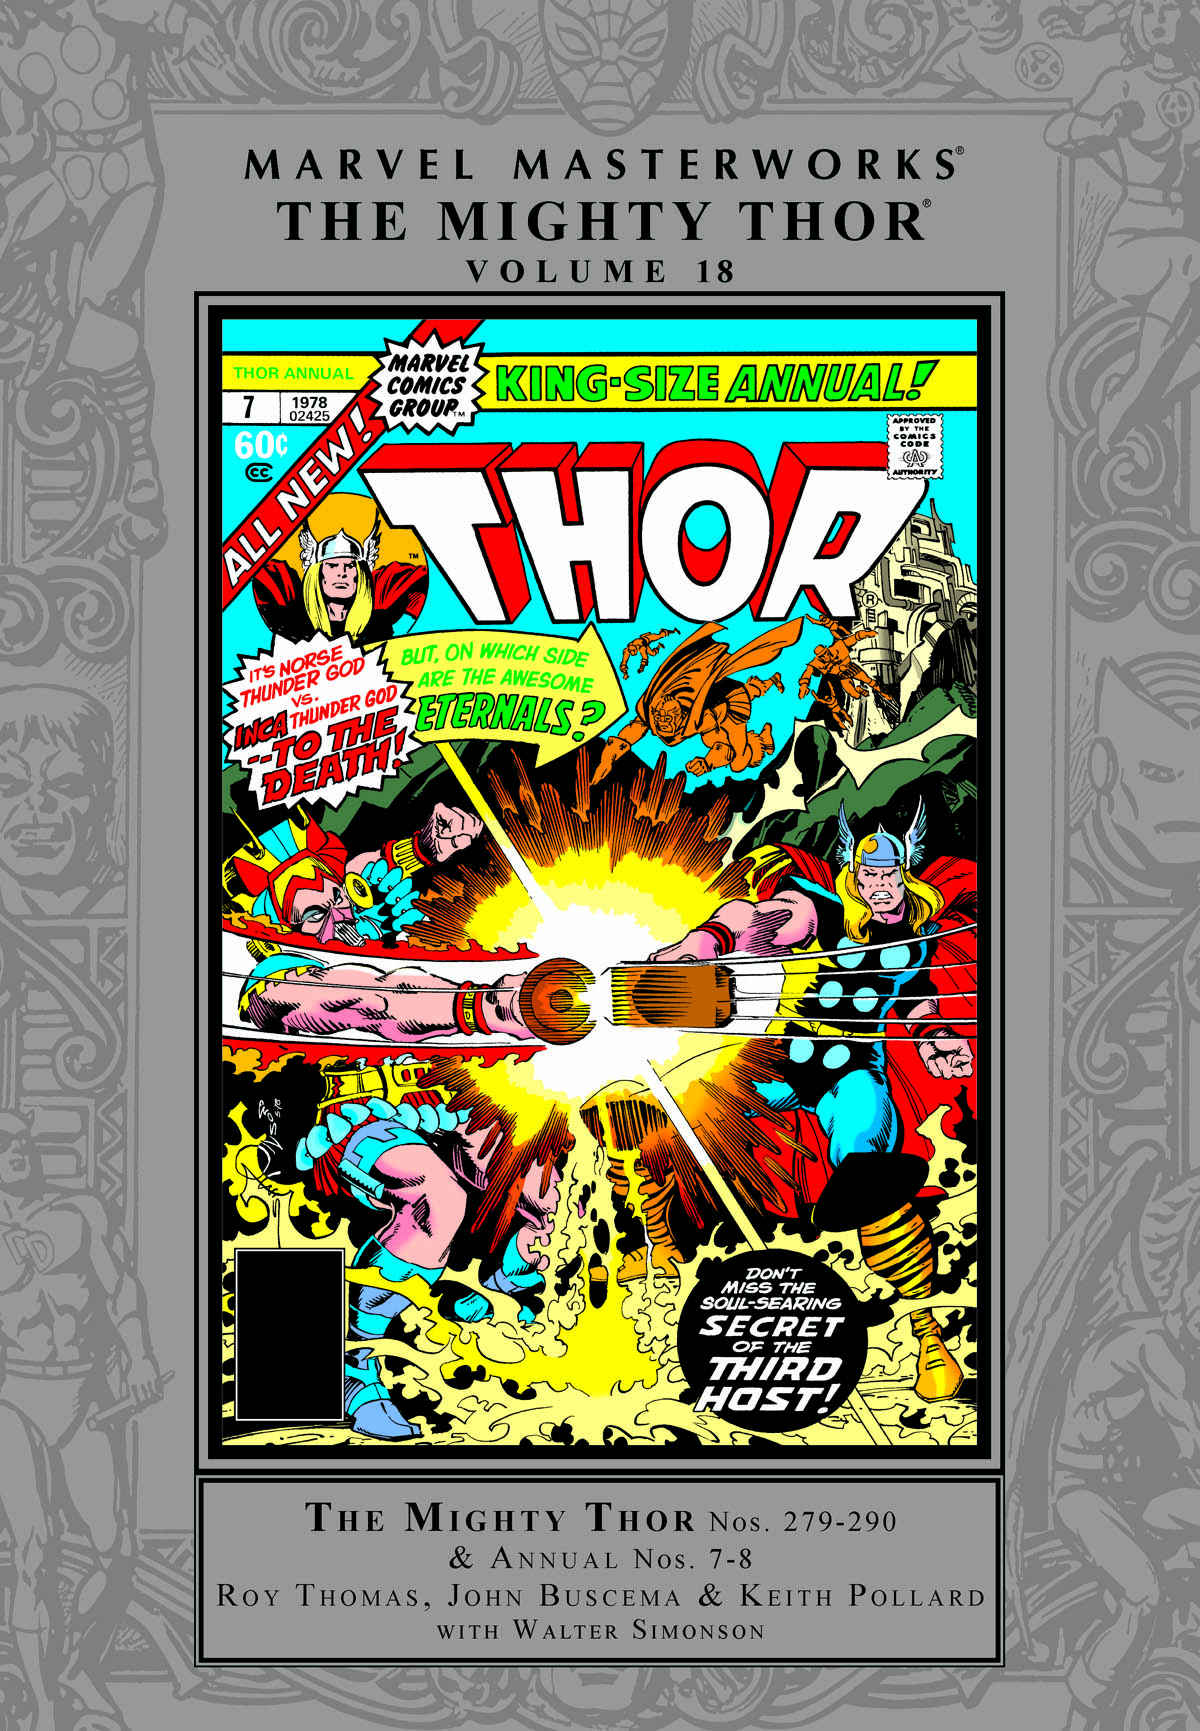 Marvel Masterworks: The Mighty Thor Vol. 18 (Trade Paperback)